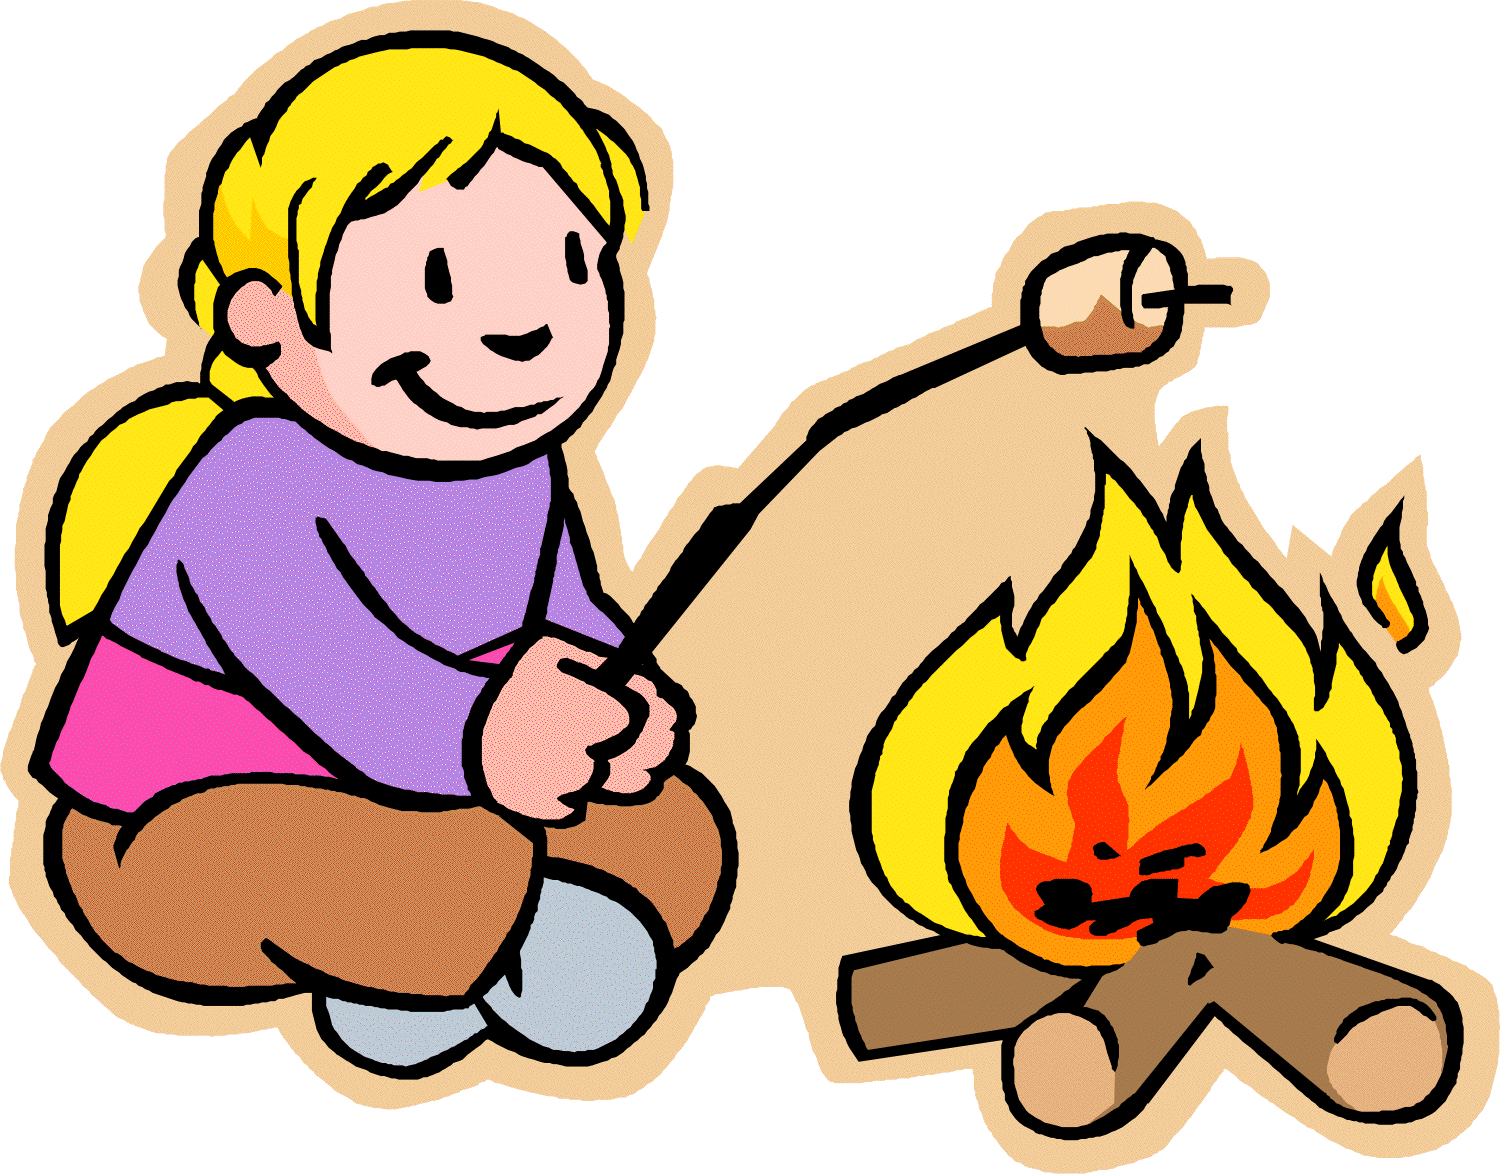 Free Campfire Images, Download Free Clip Art, Free Clip Art.